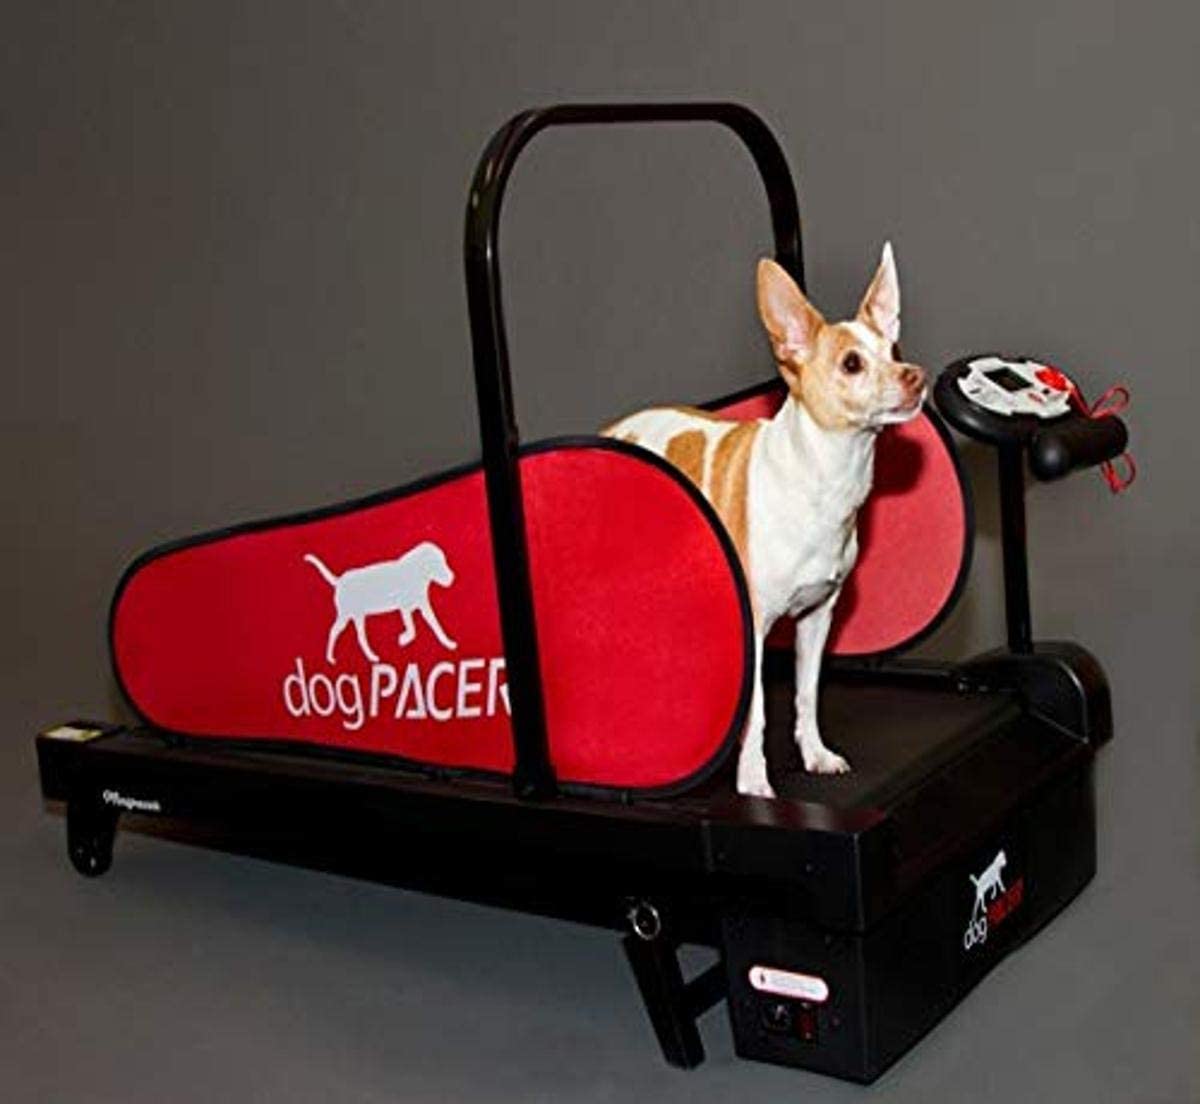 6. dogPACER MiniPACER Loopband